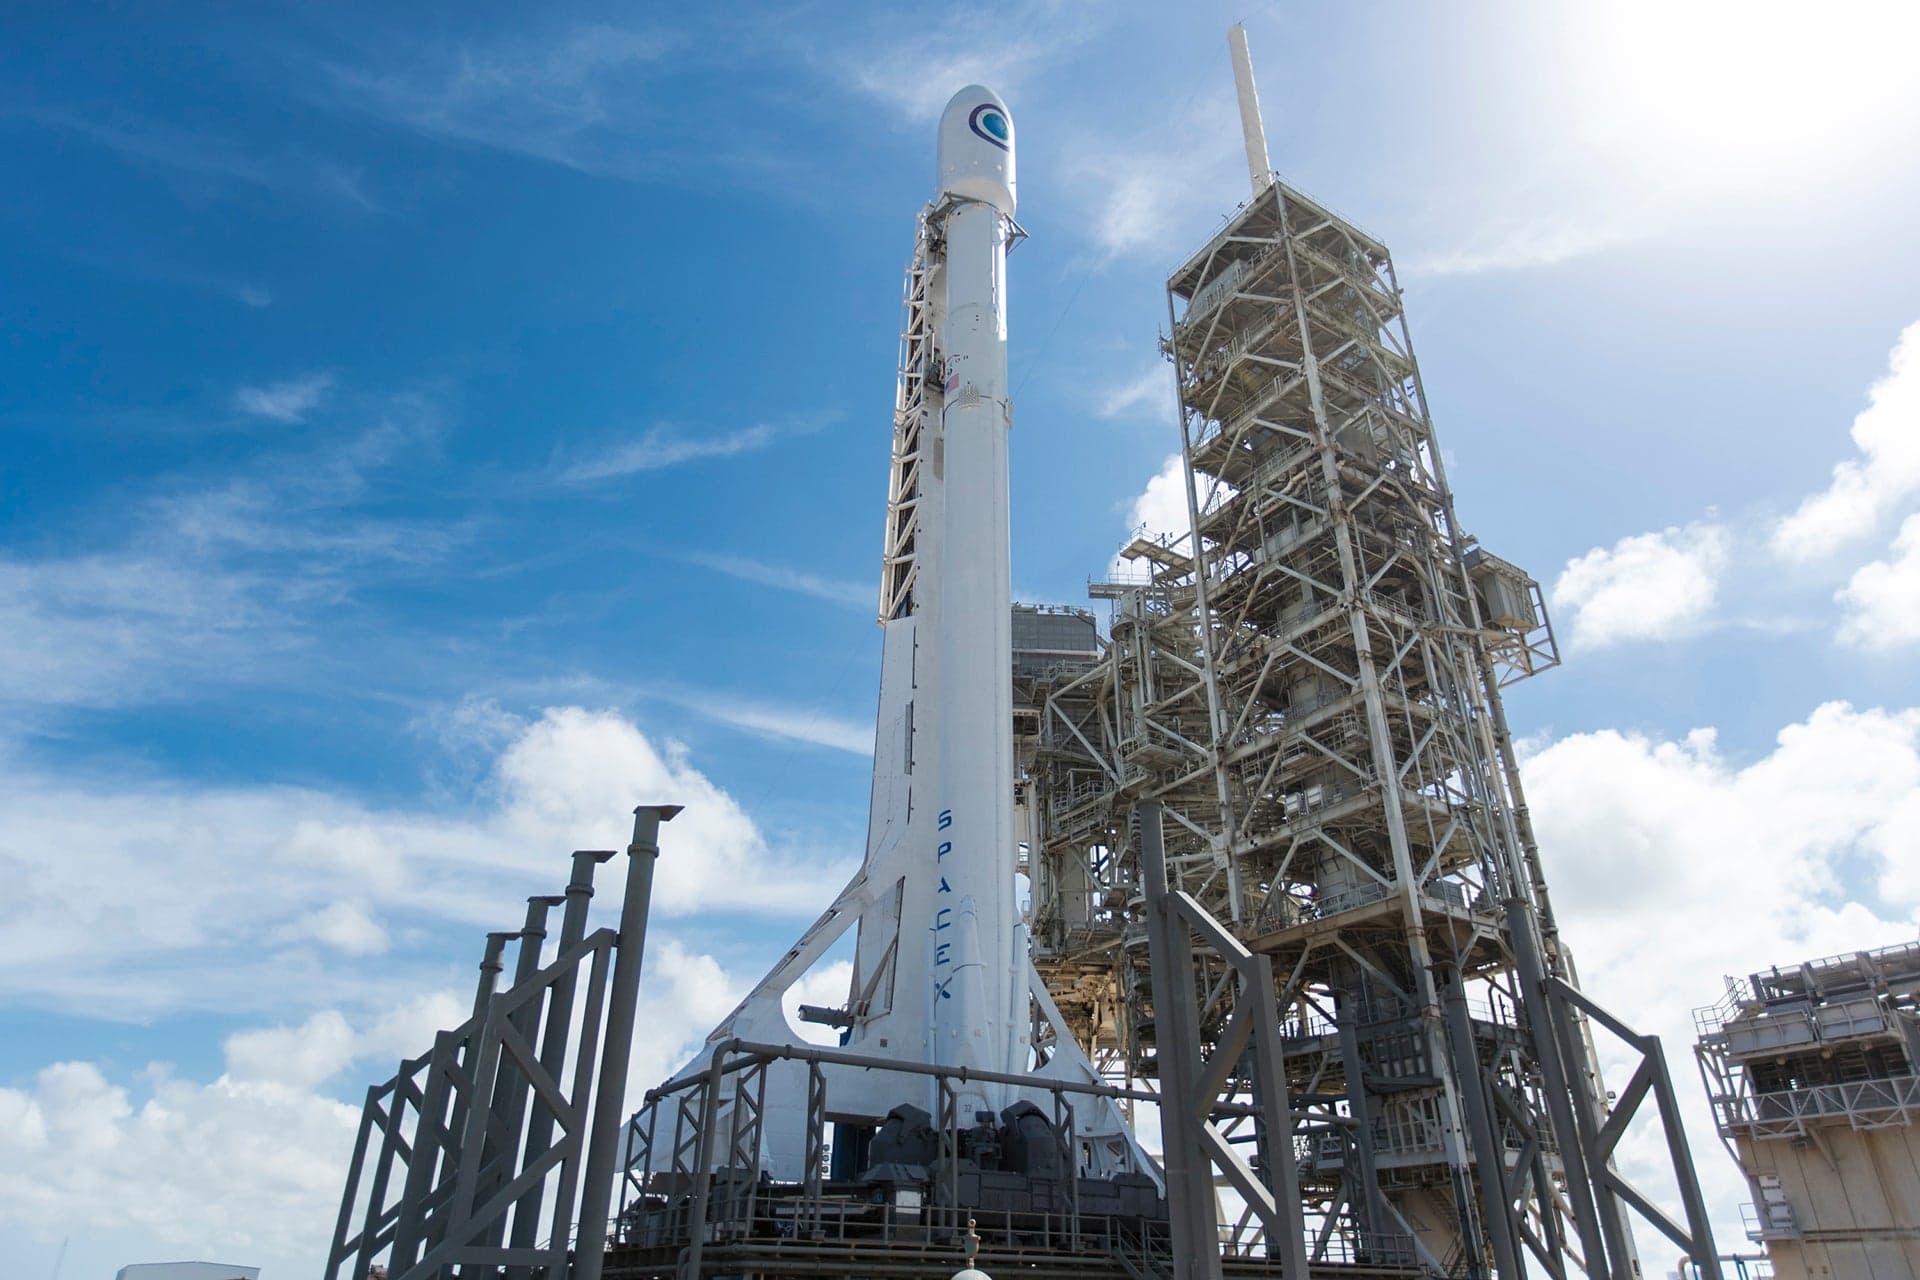 SpaceX Launches Top Secret Payload